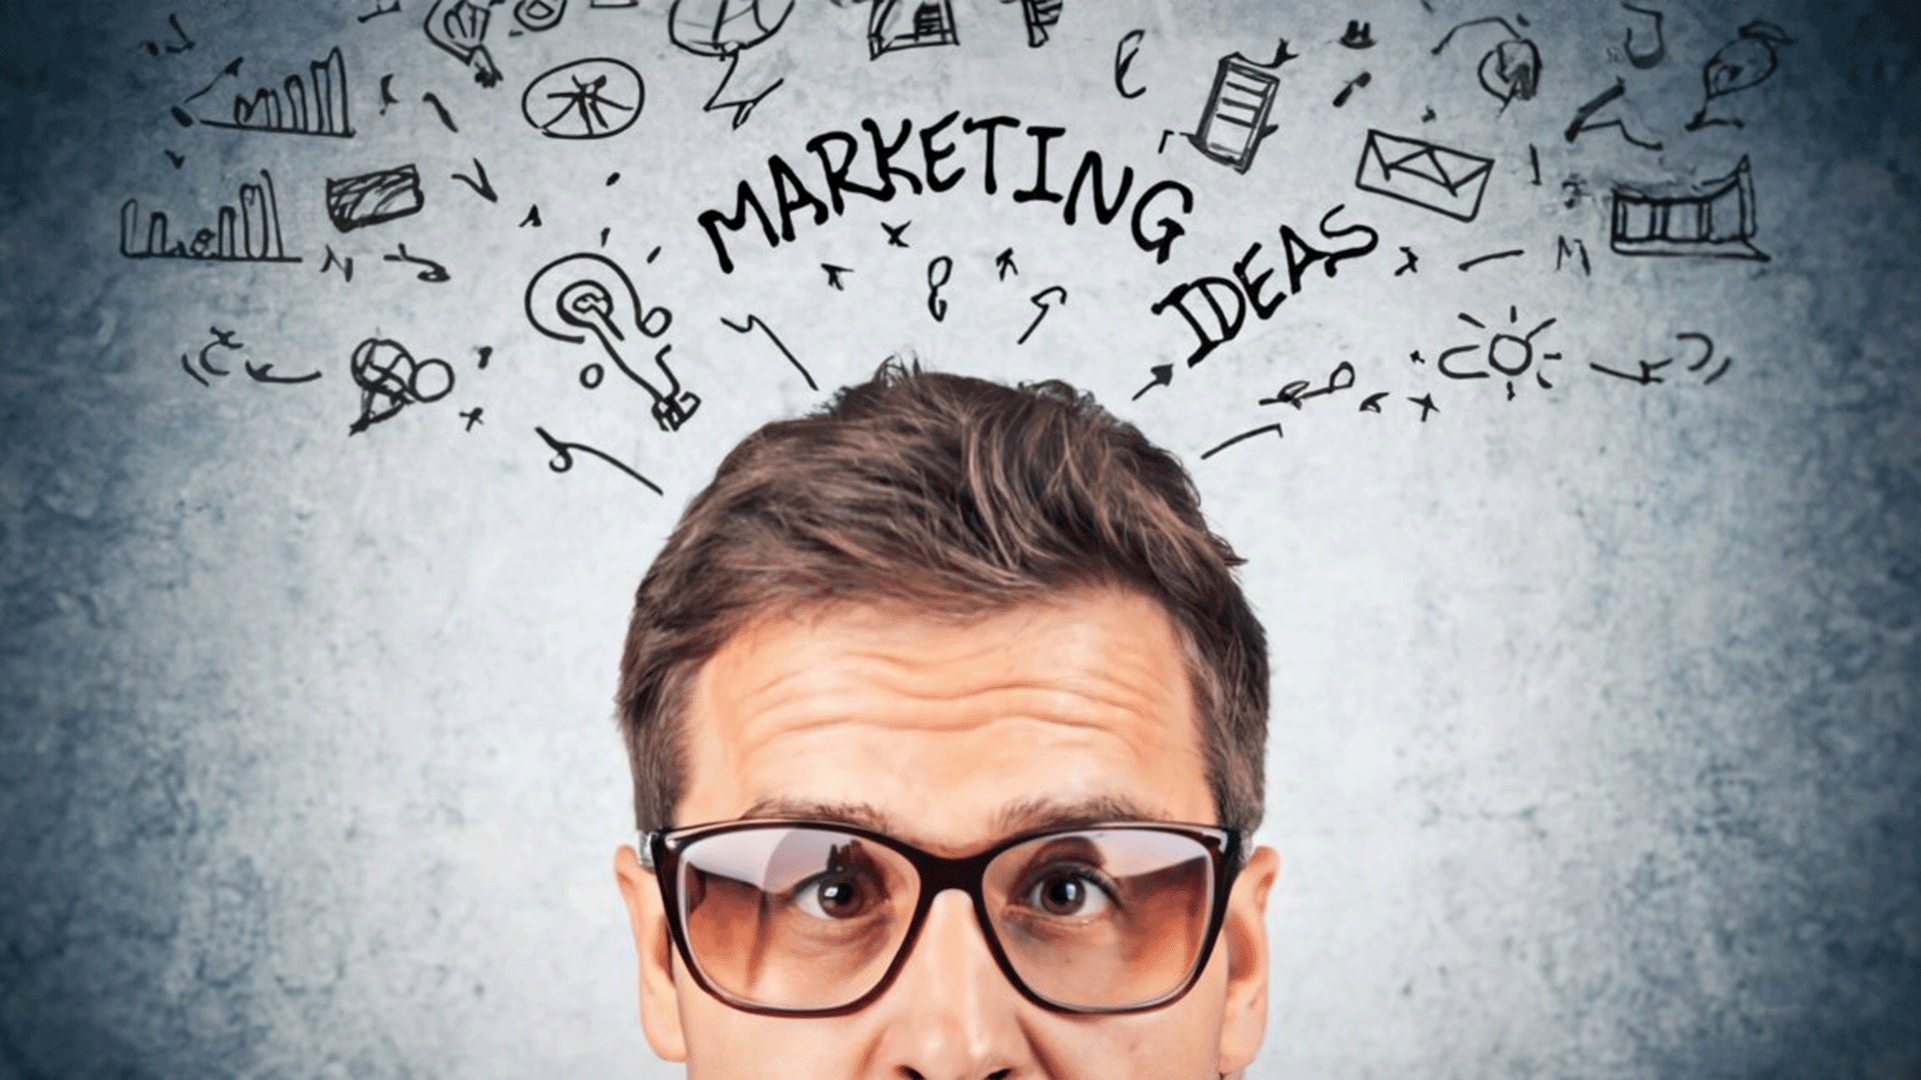 25 Free and Low-Cost Marketing Ideas for Startups